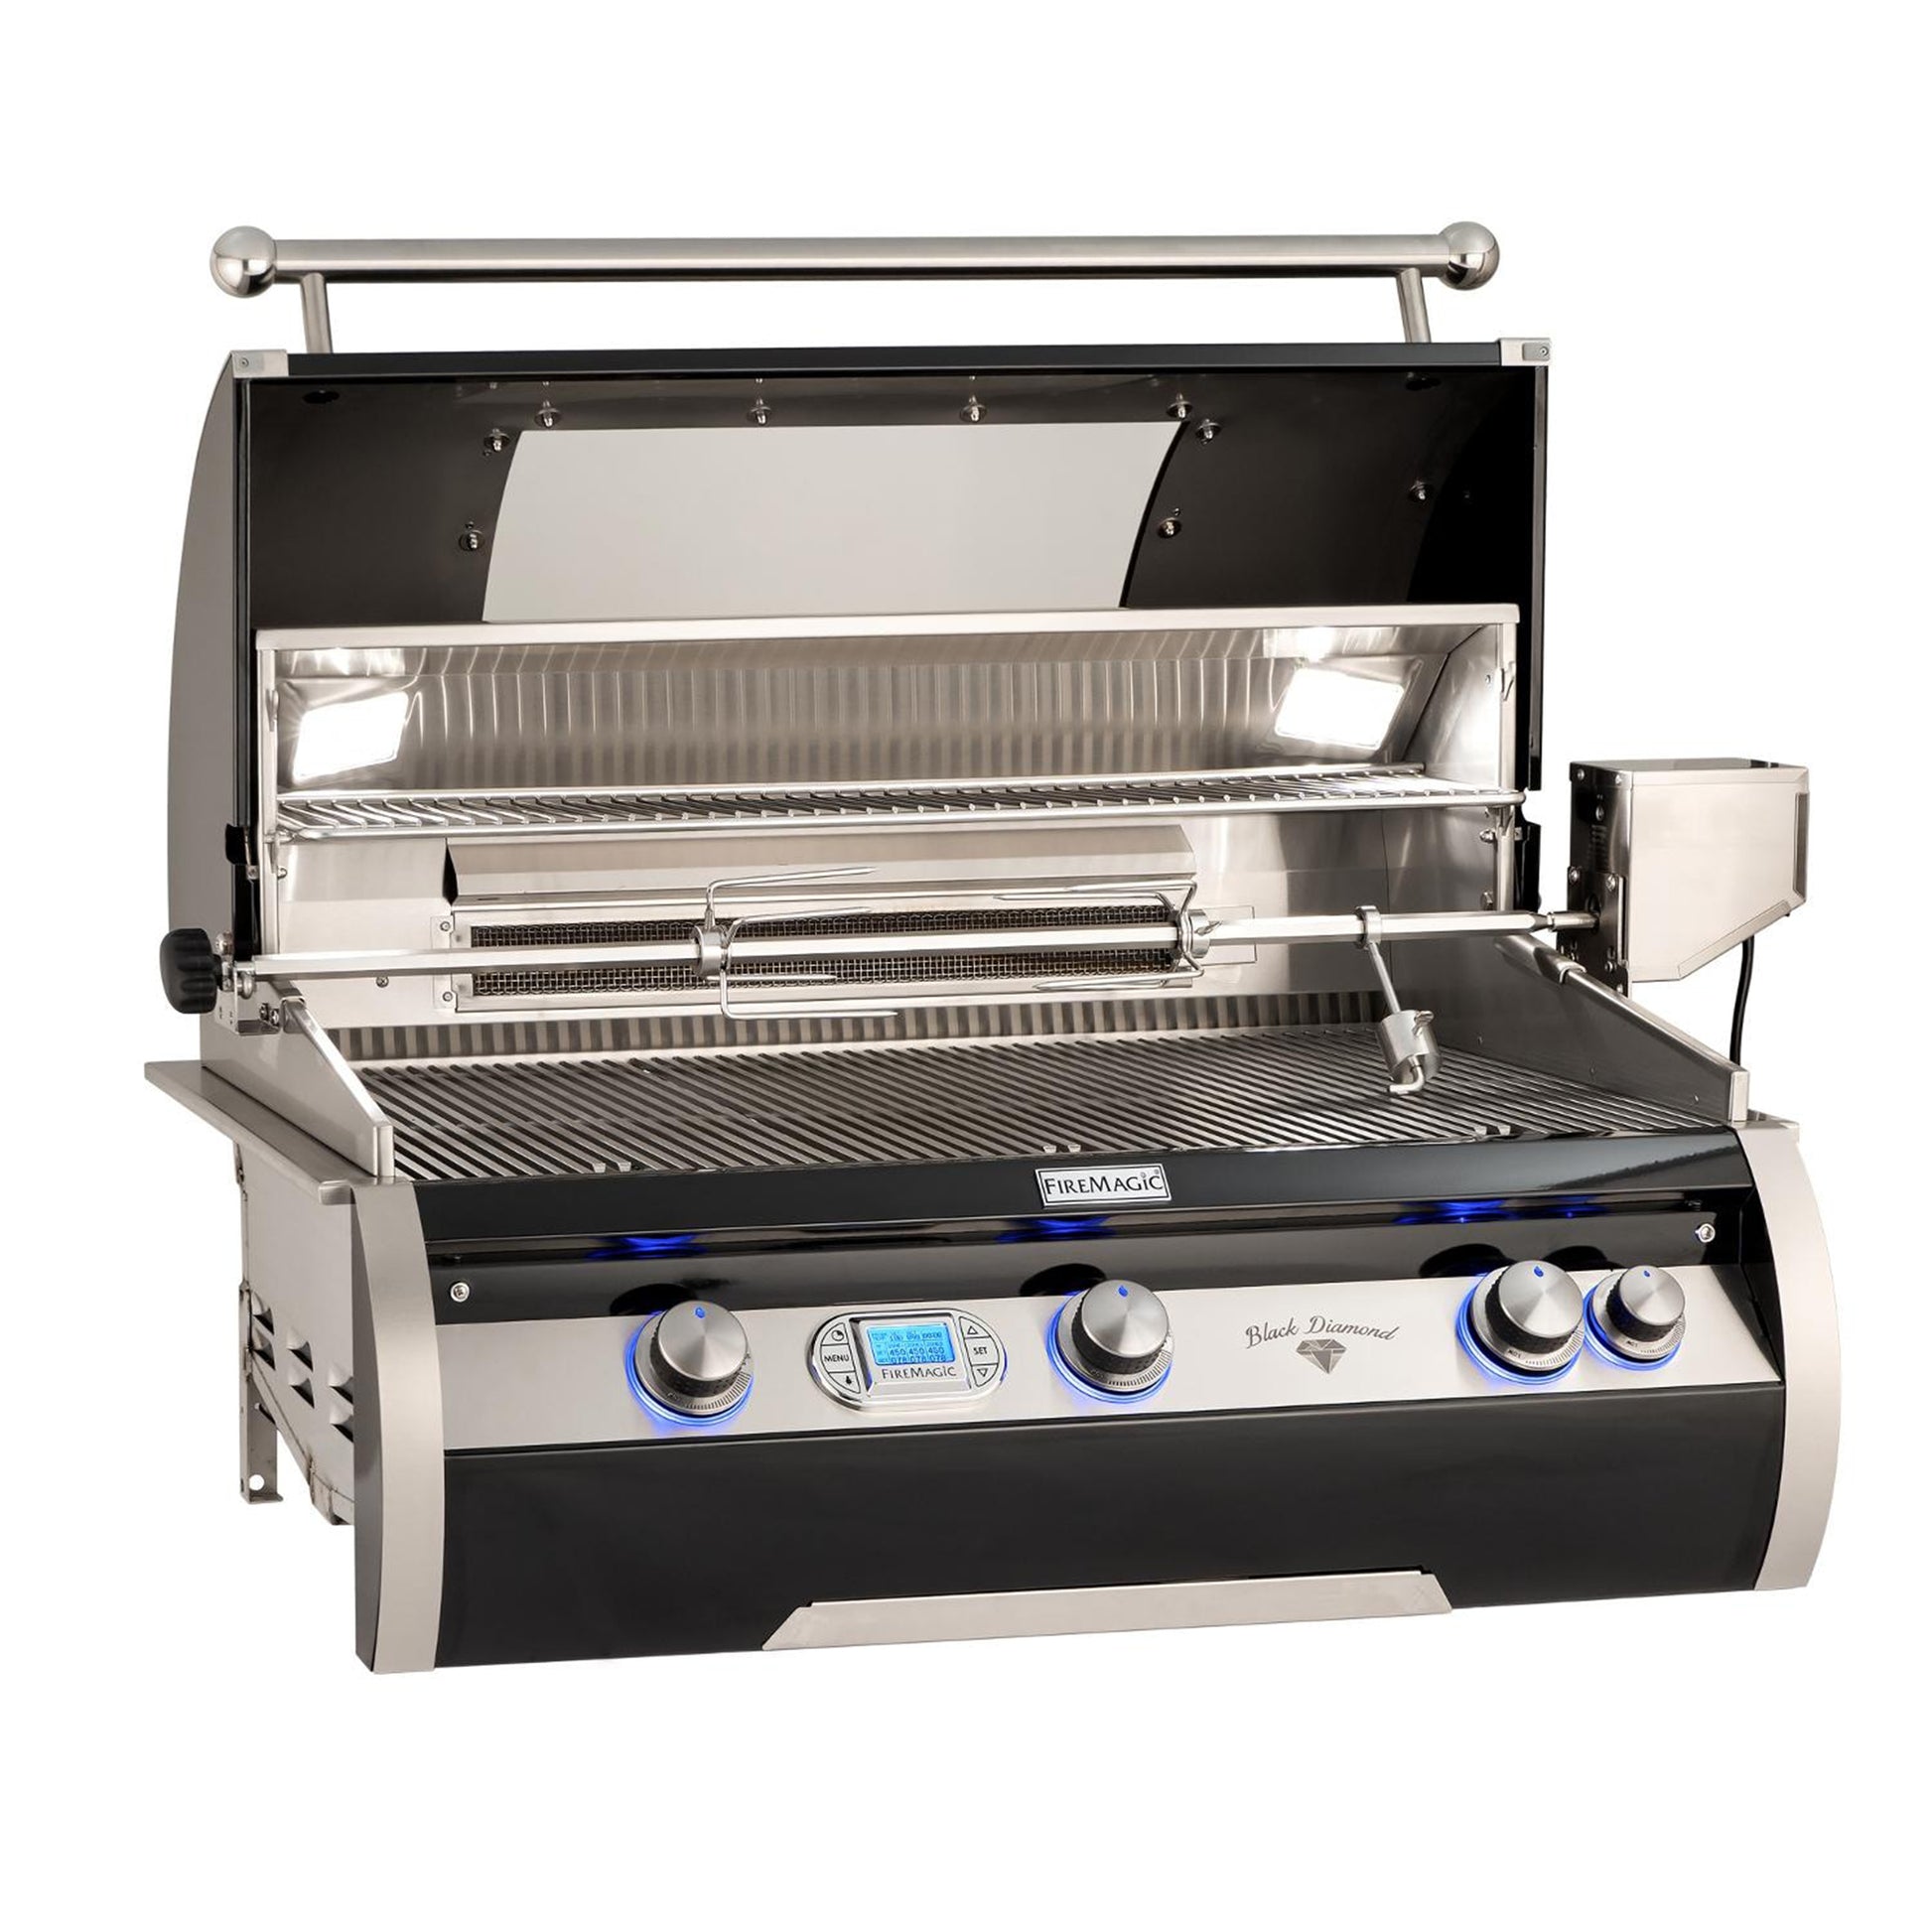 Fire Magic 23-inch Charcoal Countertop Grill